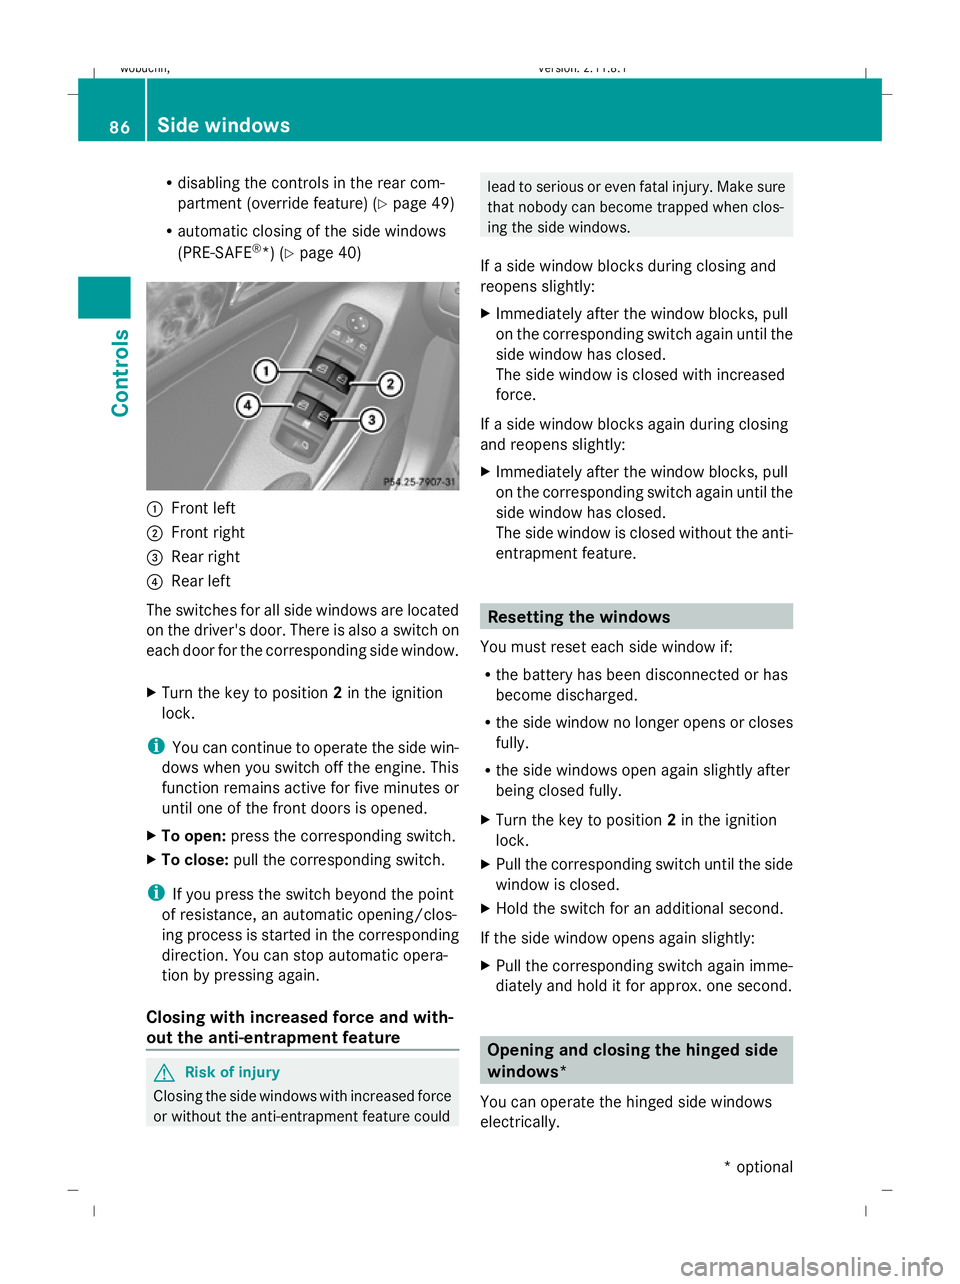 MERCEDES-BENZ GL SUV 2009  Owners Manual R
disabling the controls in the rear com-
partment (override feature) (Y page 49)
R automatic closing of the side windows
(PRE-SAFE ®
*) (Y page 40) :
Front left
; Front right
= Rear right
? Rear lef